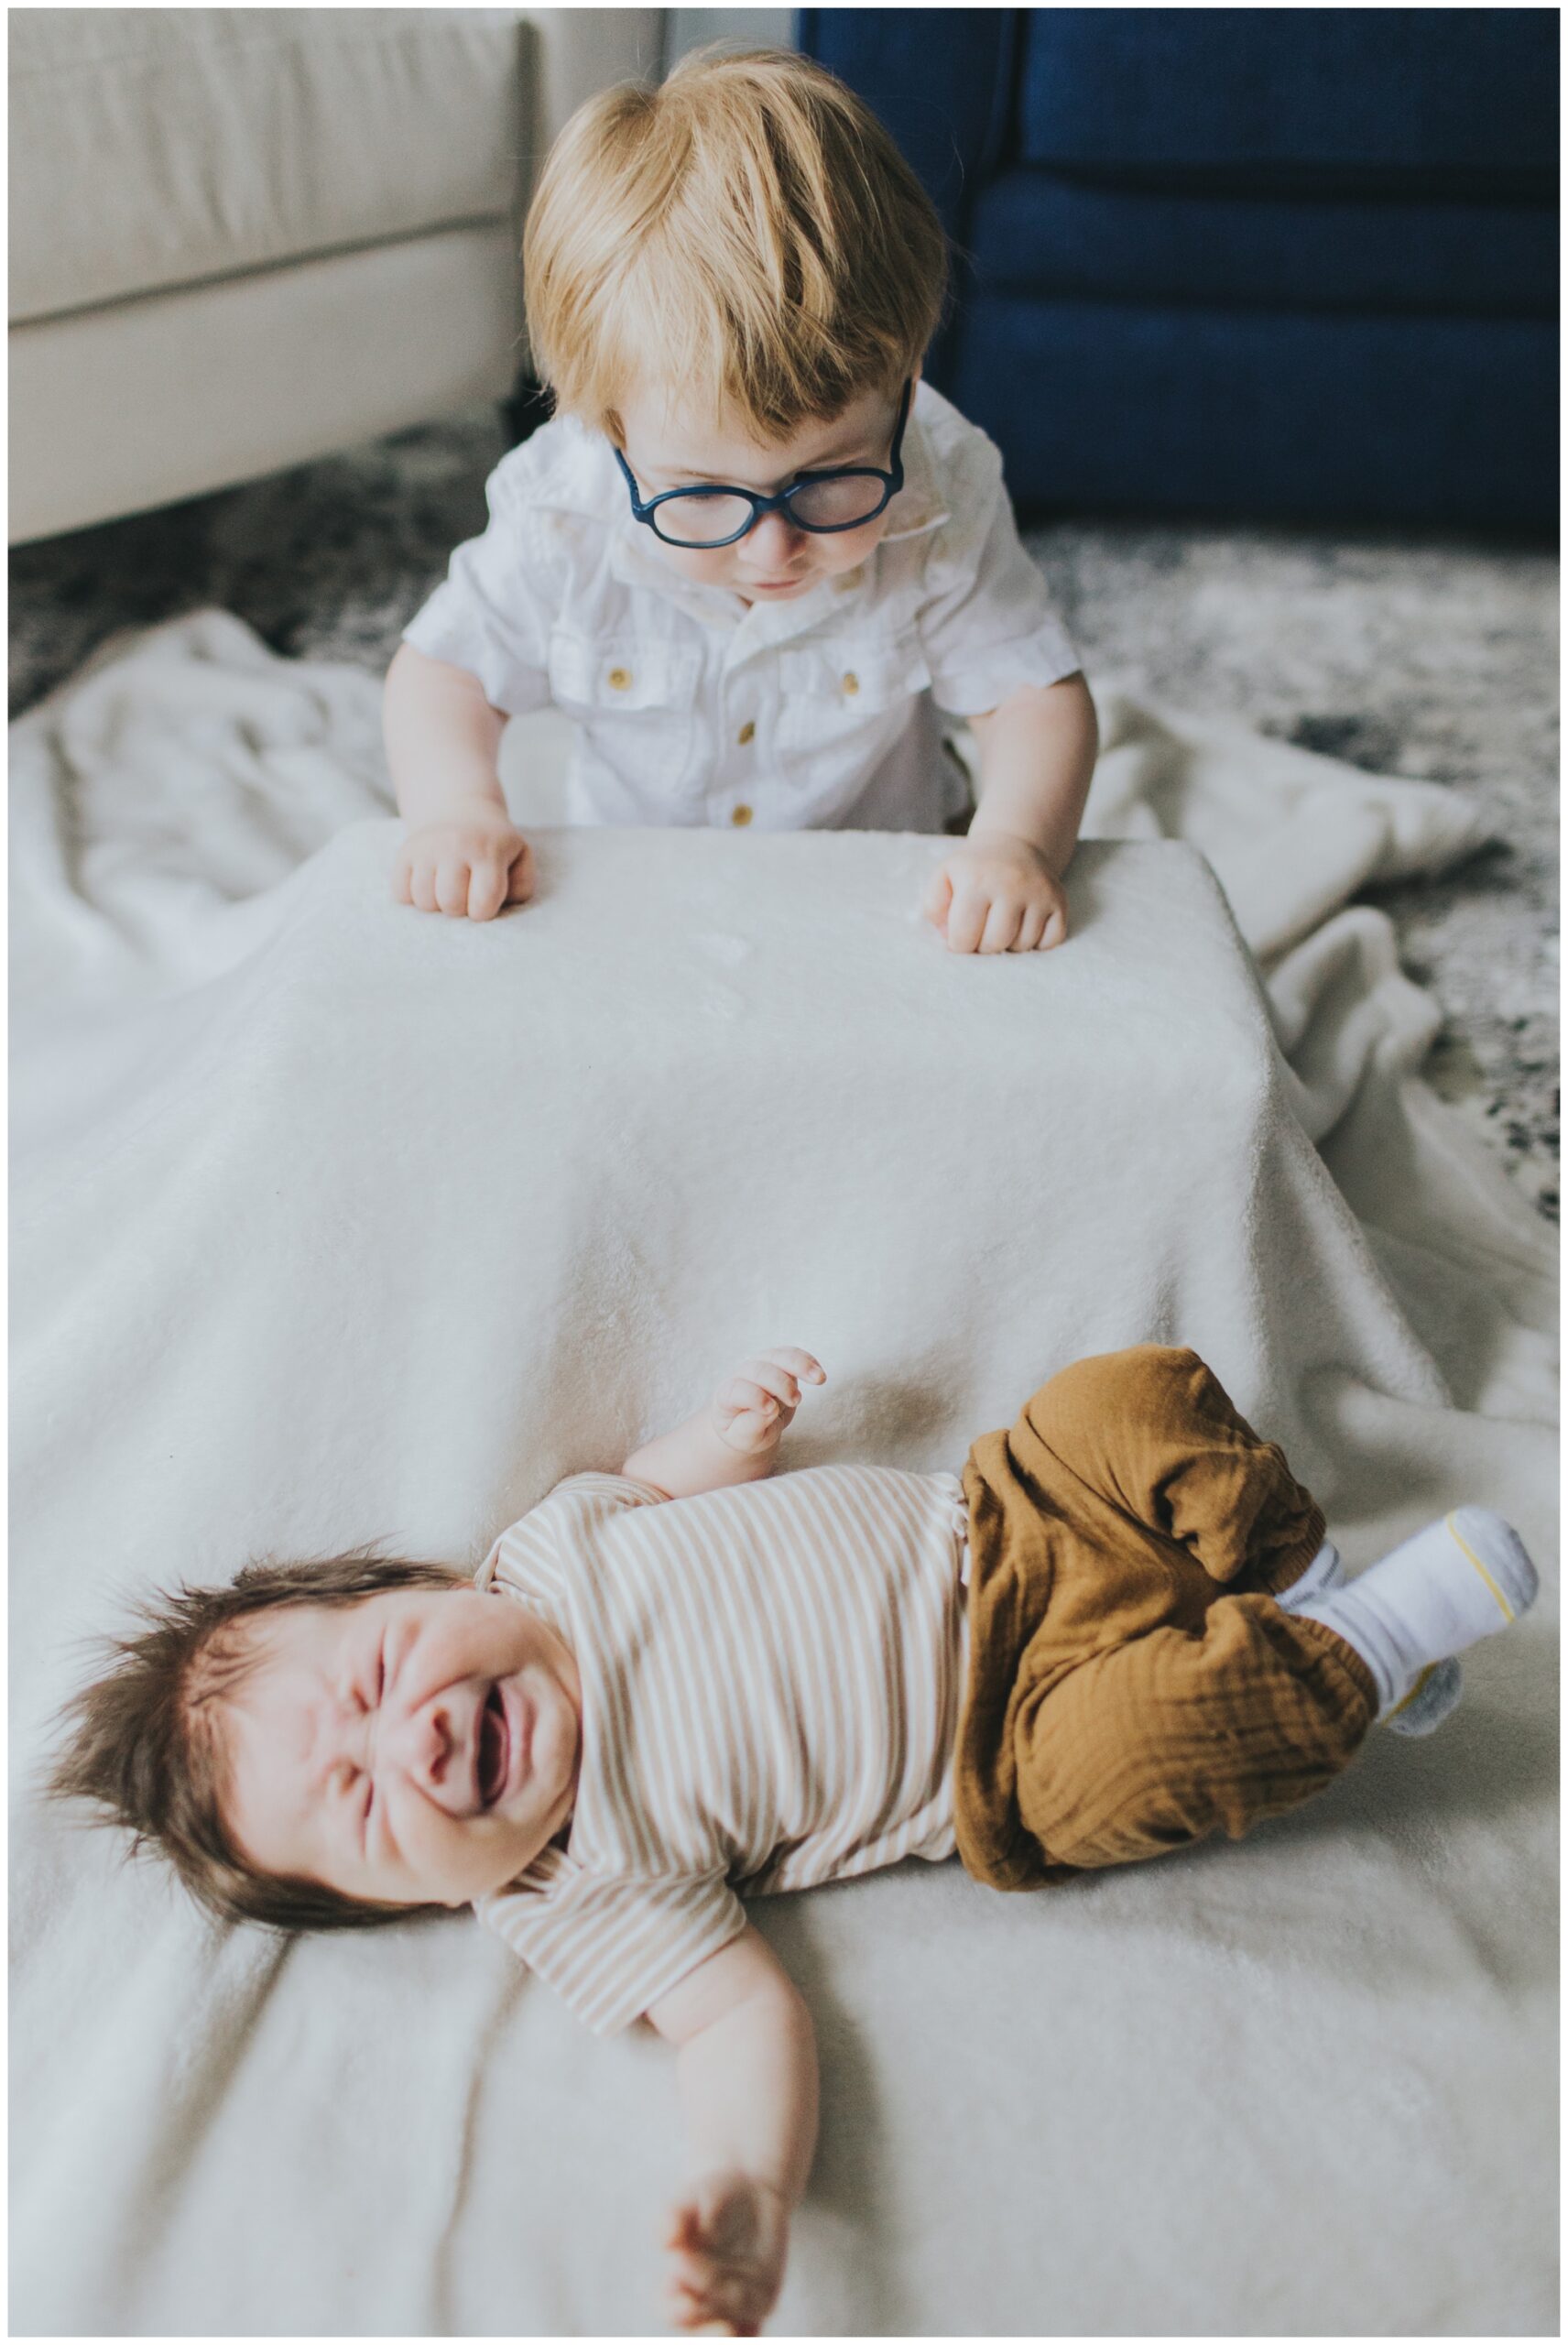 sibling picture ideas by Meg Adamik Creative